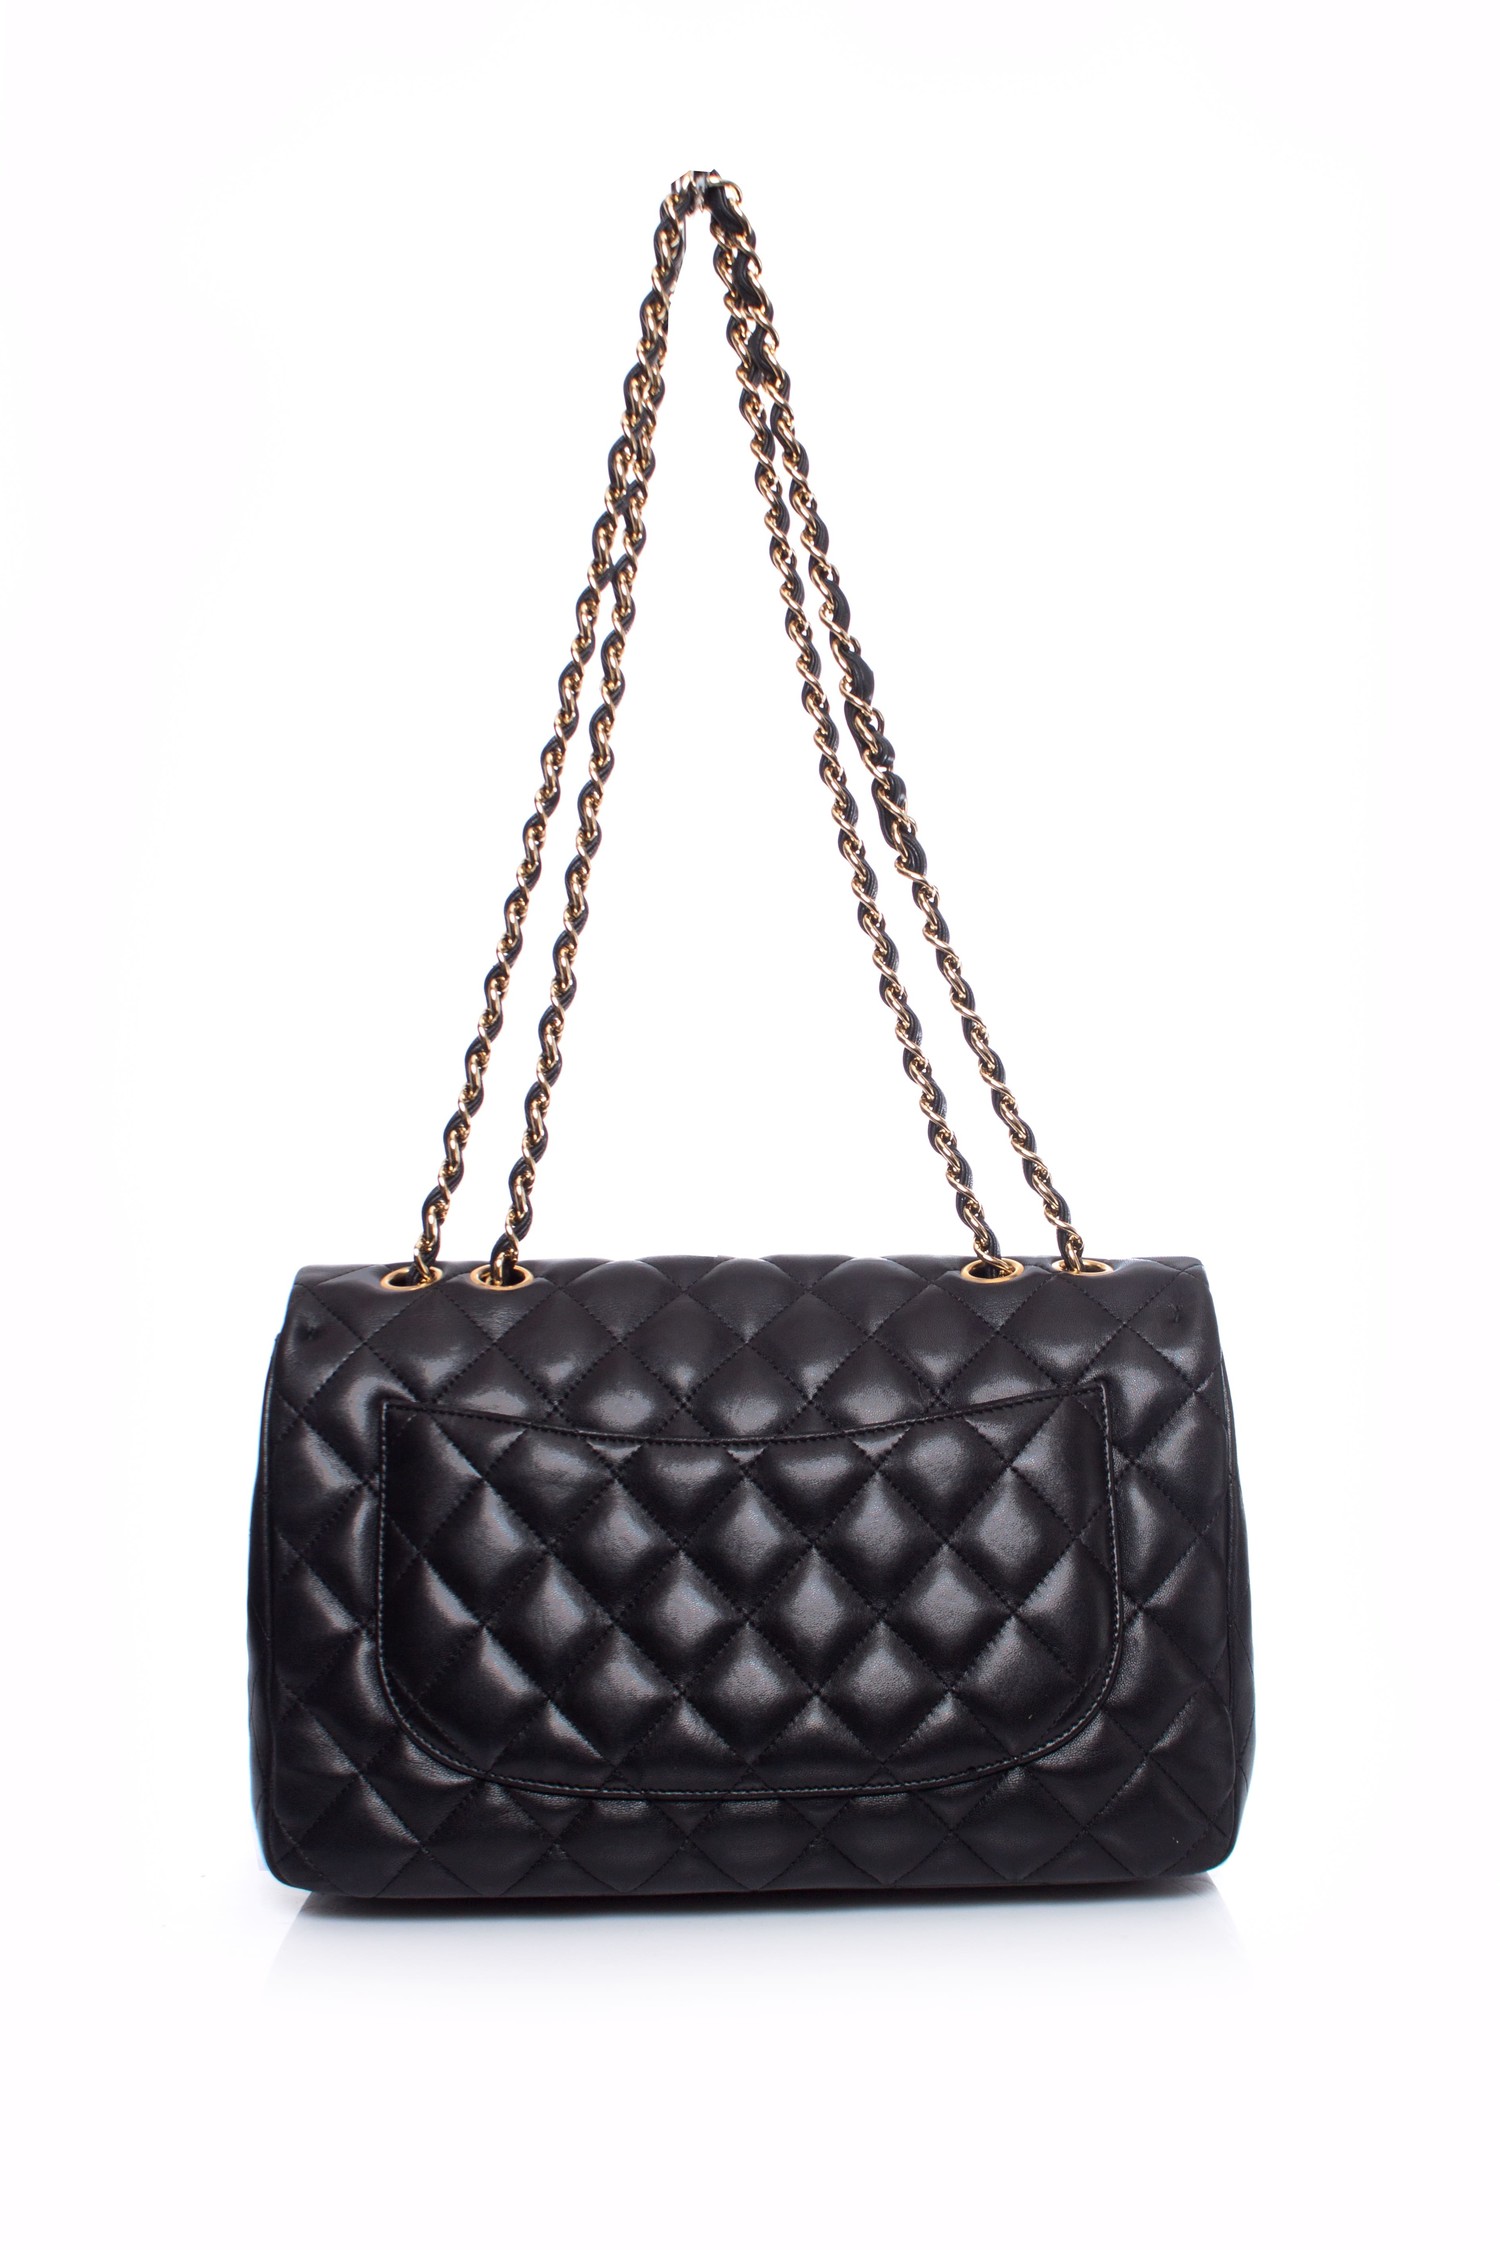 Chanel, Black Timeless Quilted Jumbo flap bag - Unique Designer Pieces